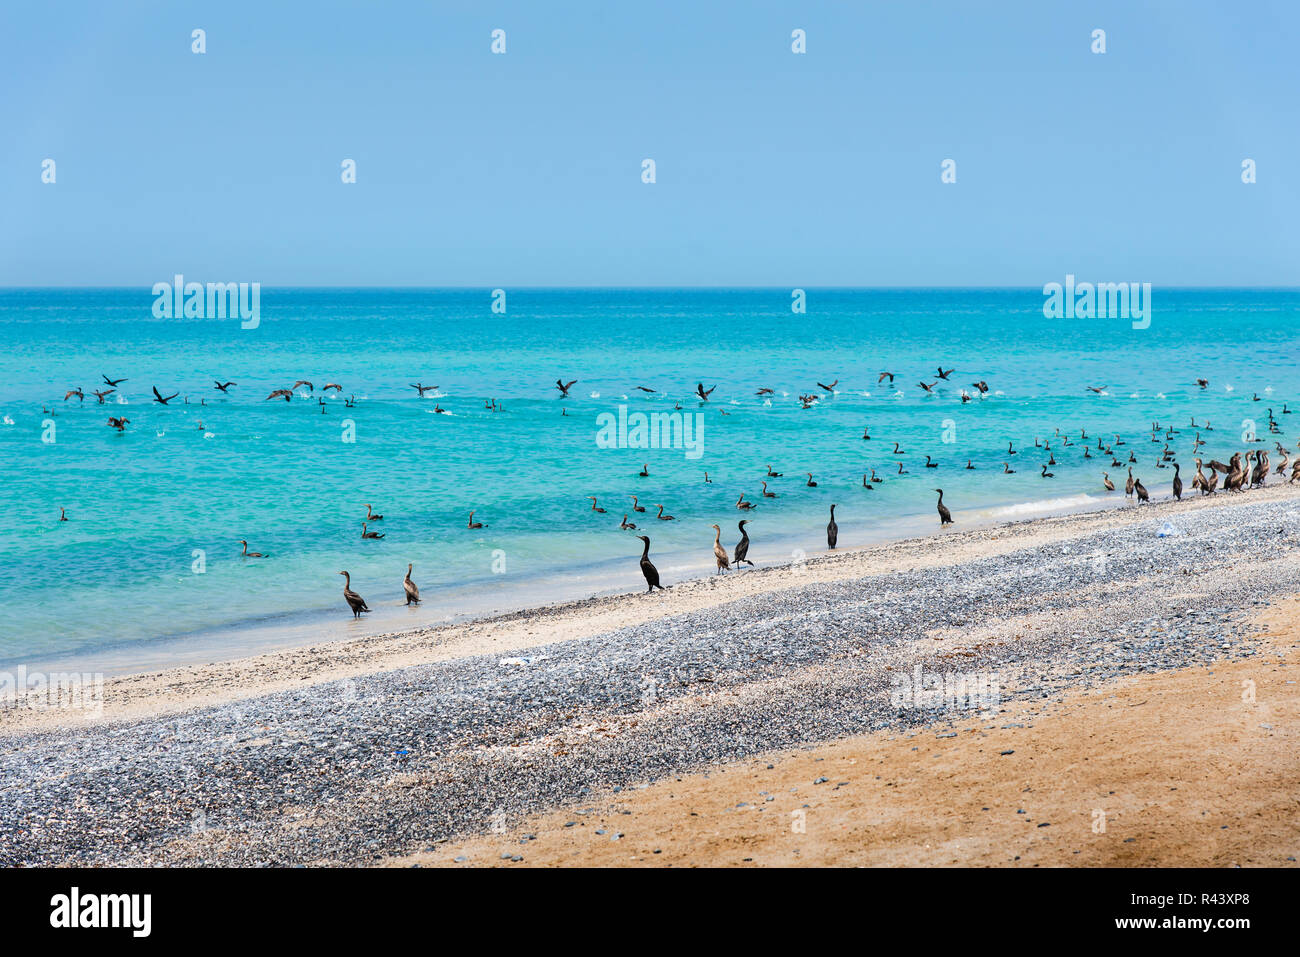 Beautiful beach crowded with birds on a sunny day Stock Photo